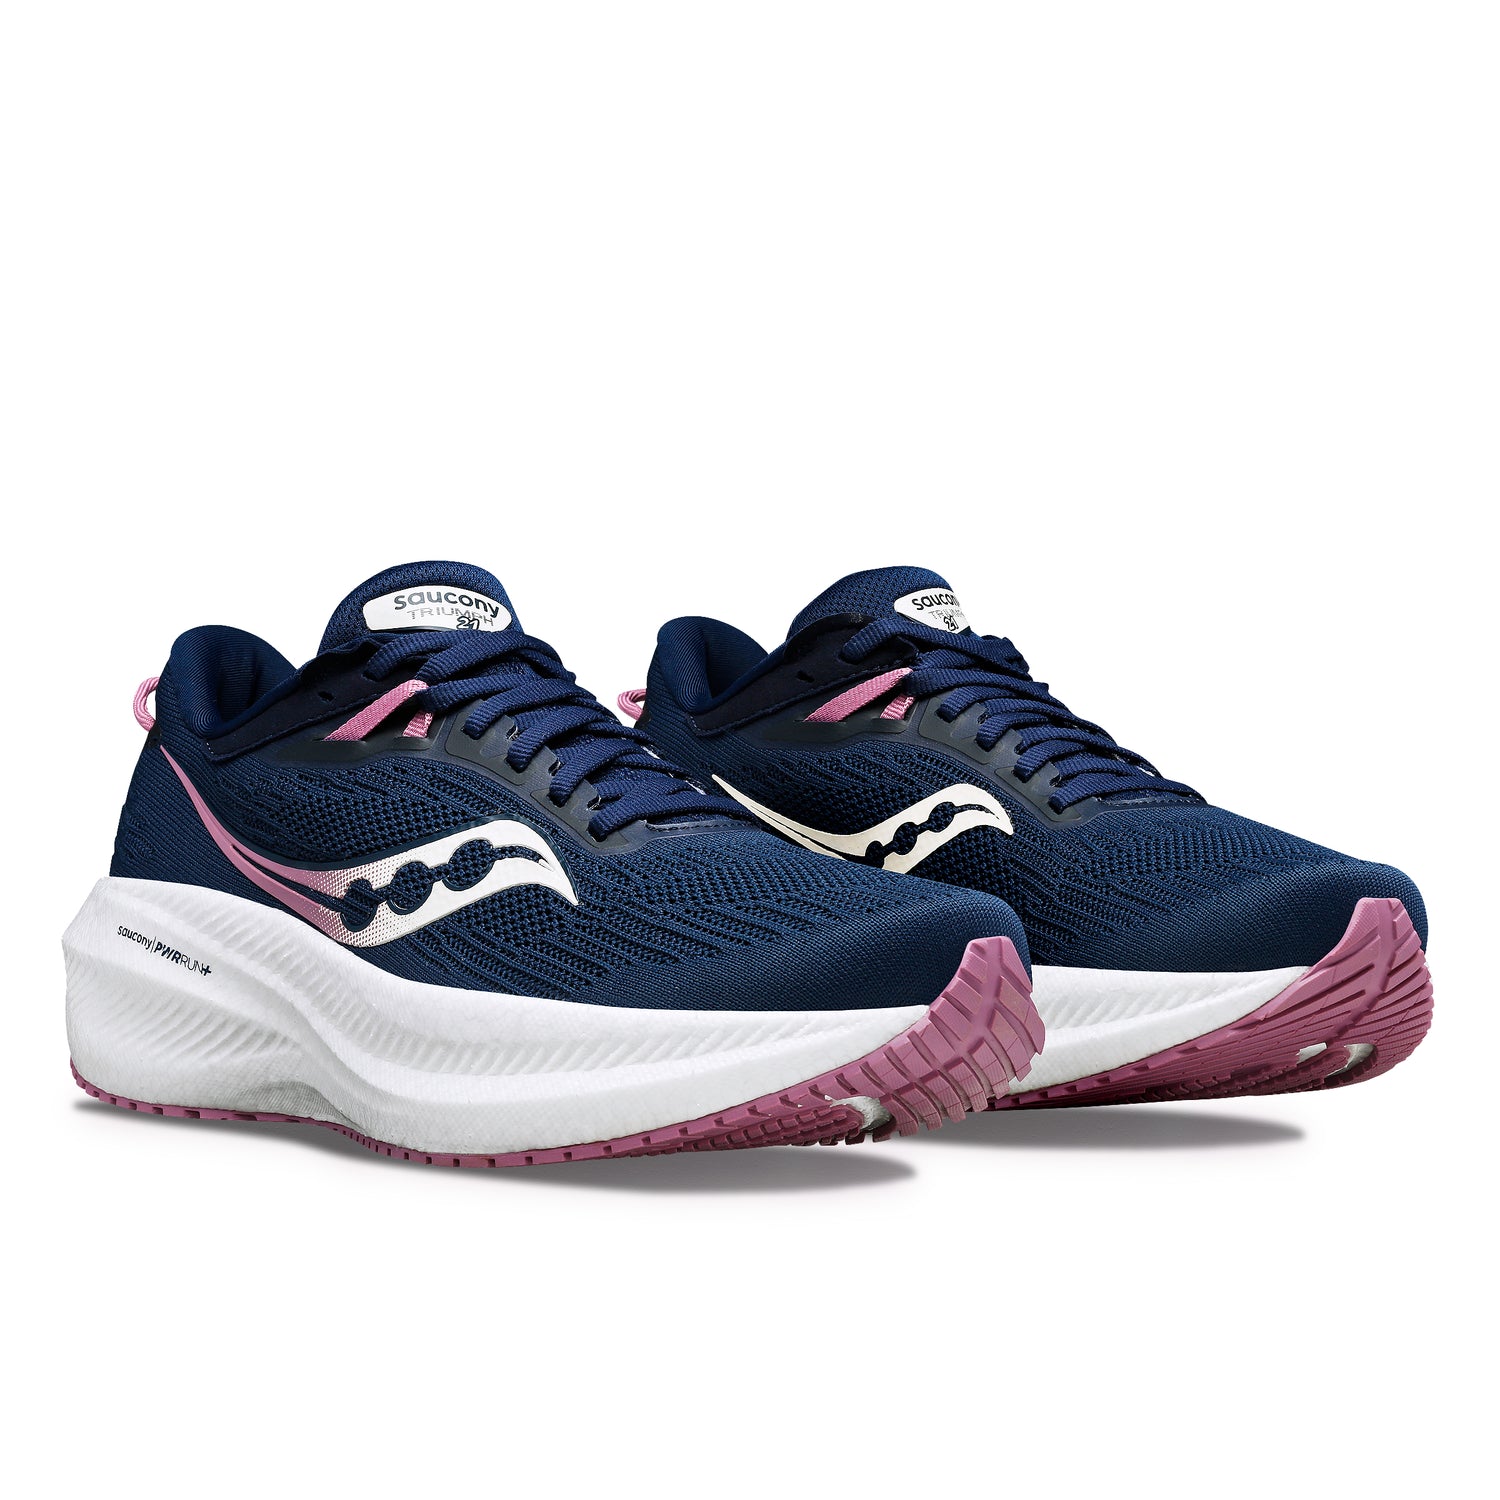 Saucony Women's Triumph 21 Running Shoes Navy/Orchid